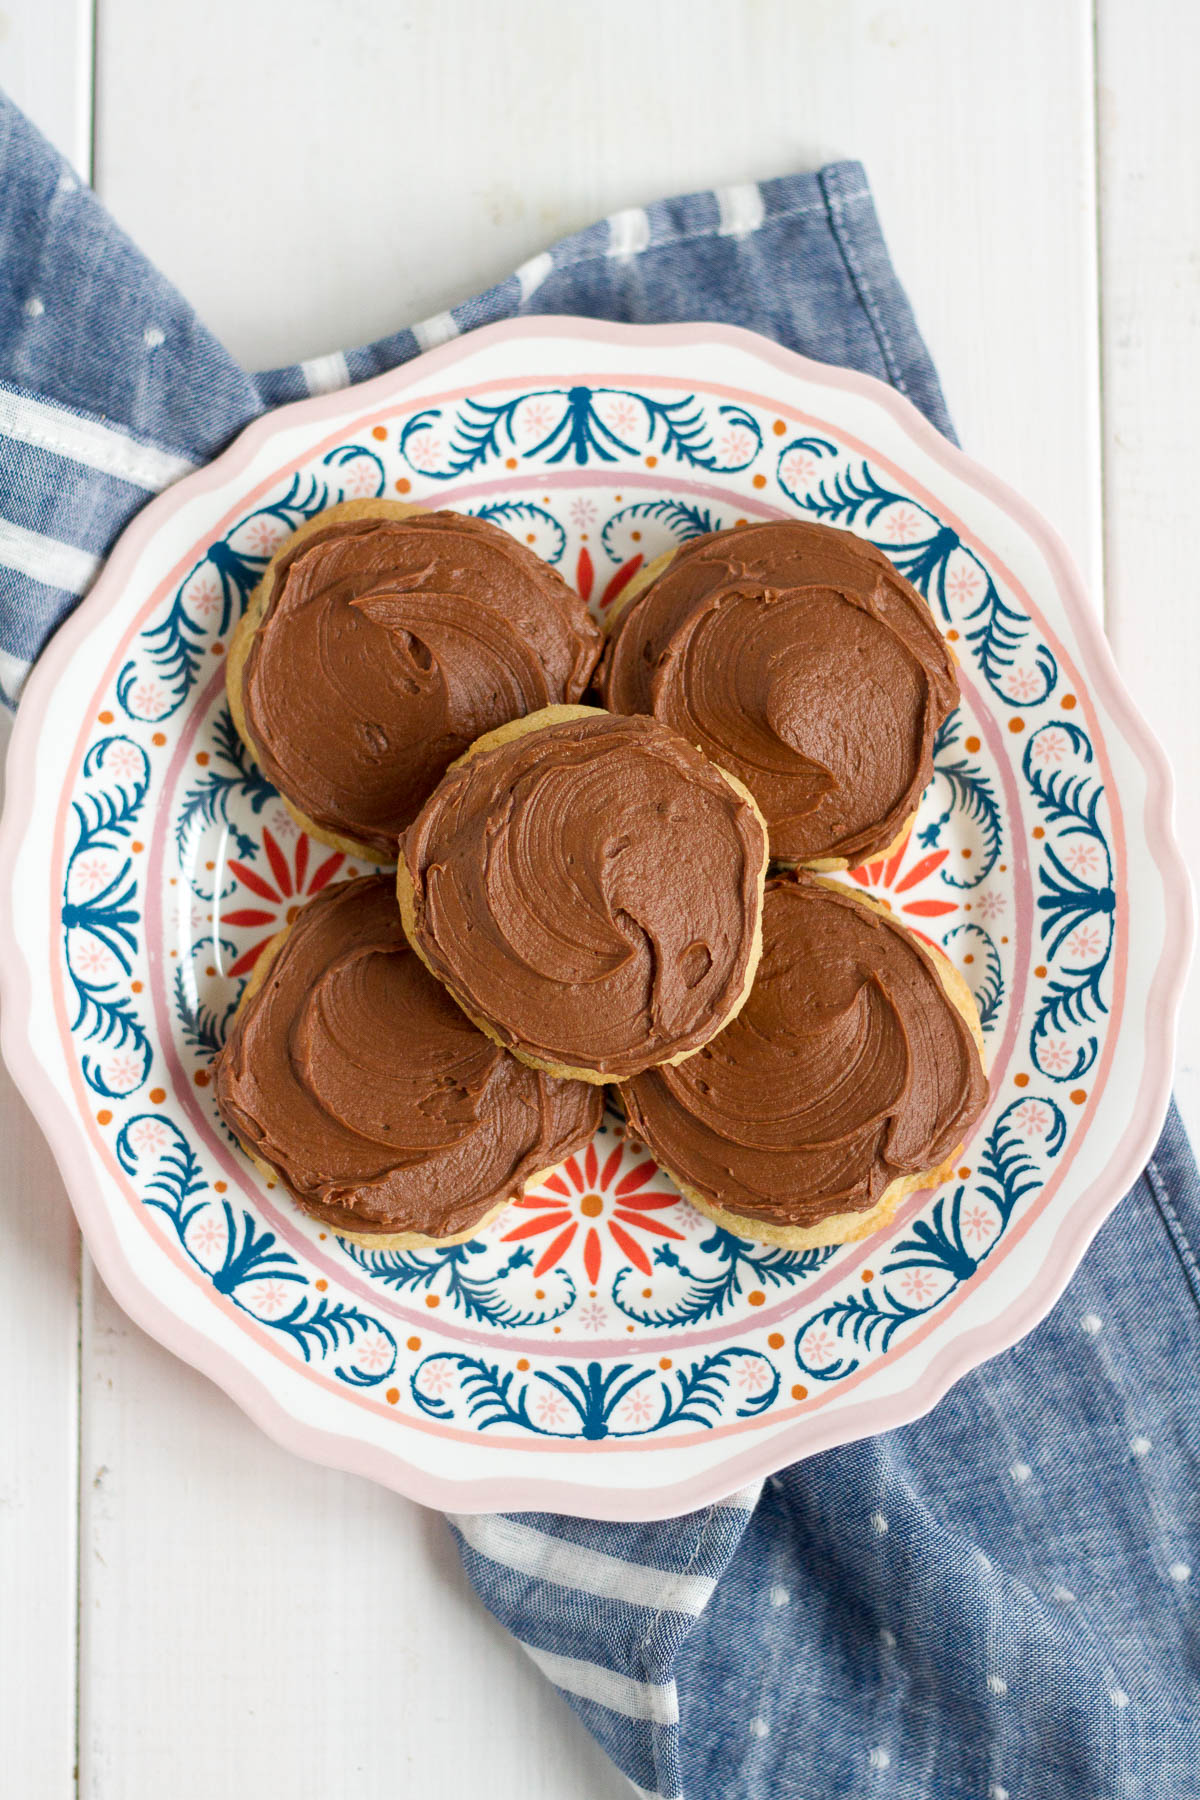 I took our favorite chocolate chip cookie recipe and topped it with our favorite chocolate frosting, and the results are a decadent new favorite!